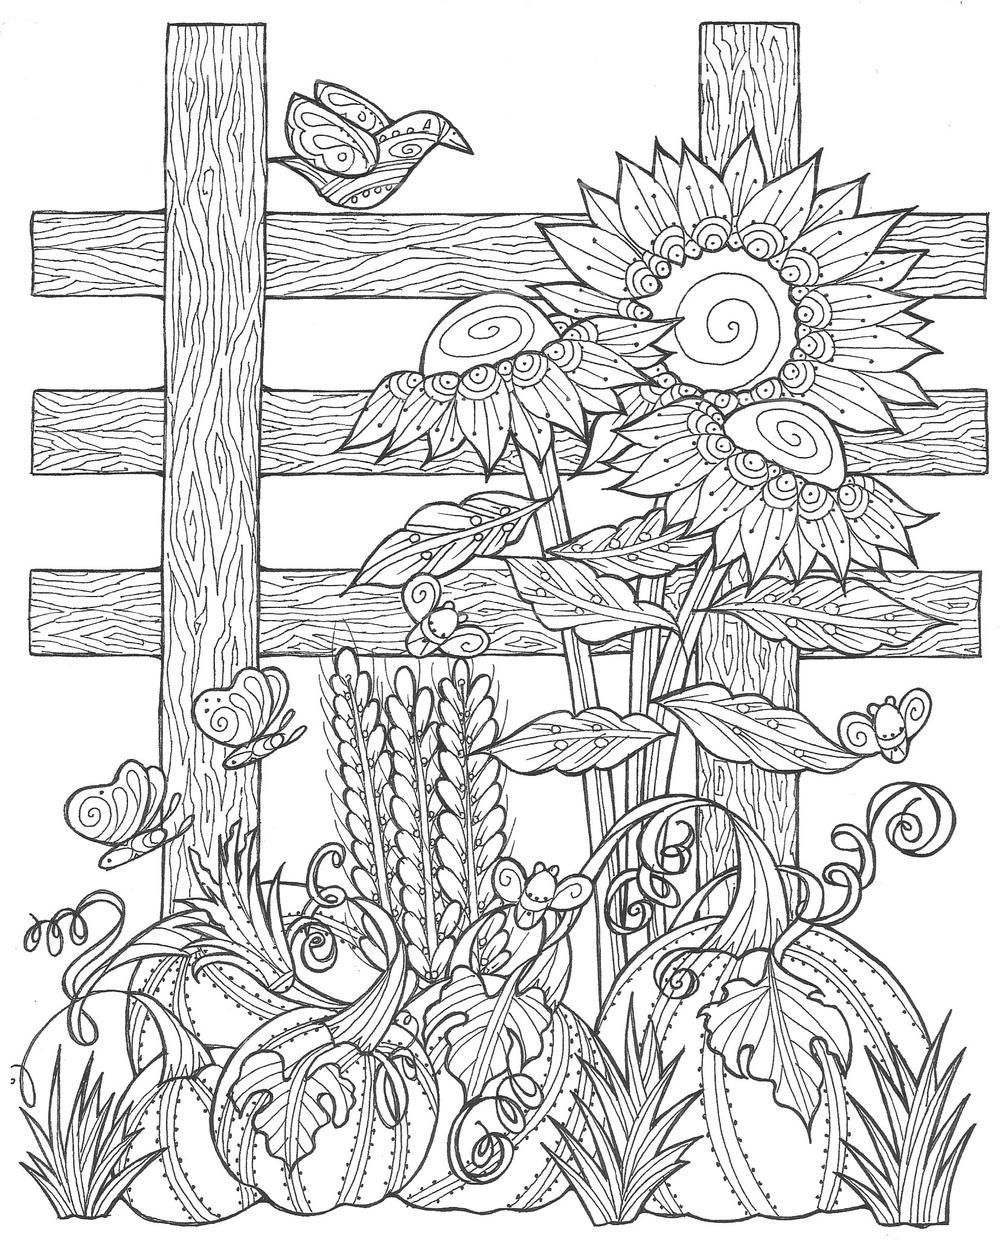 Coloring Pages : Sunflower Coloring Pages For Adults Aesthetic ...